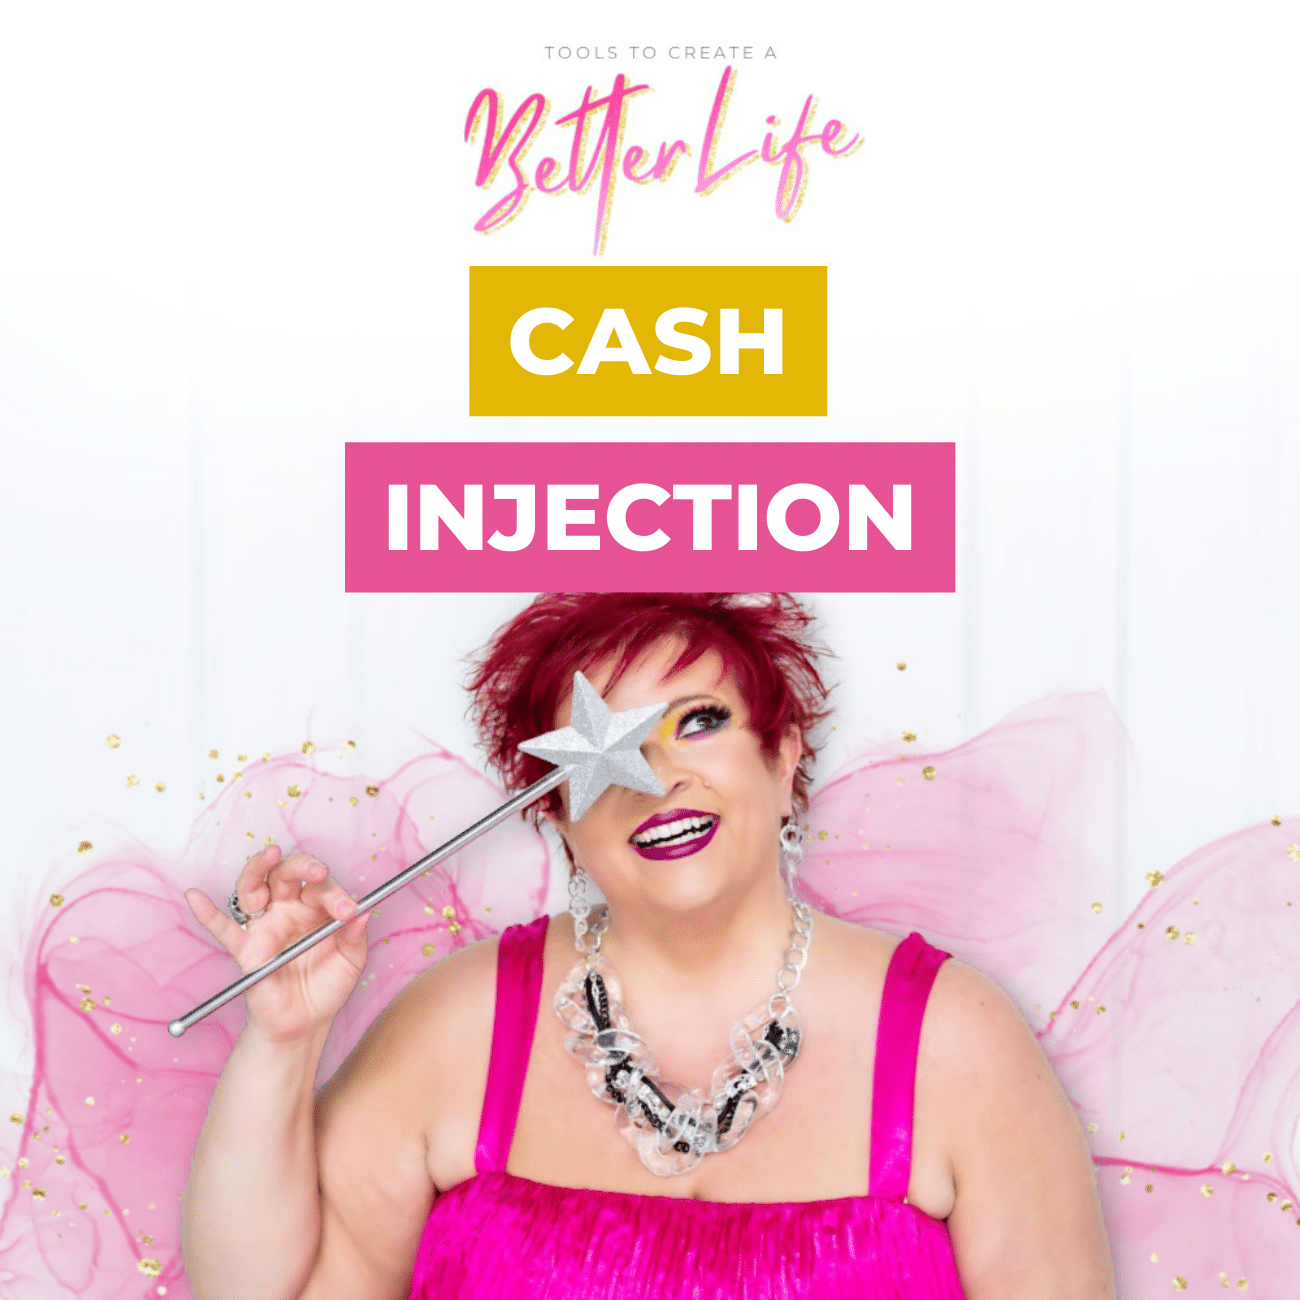 Cash Injection